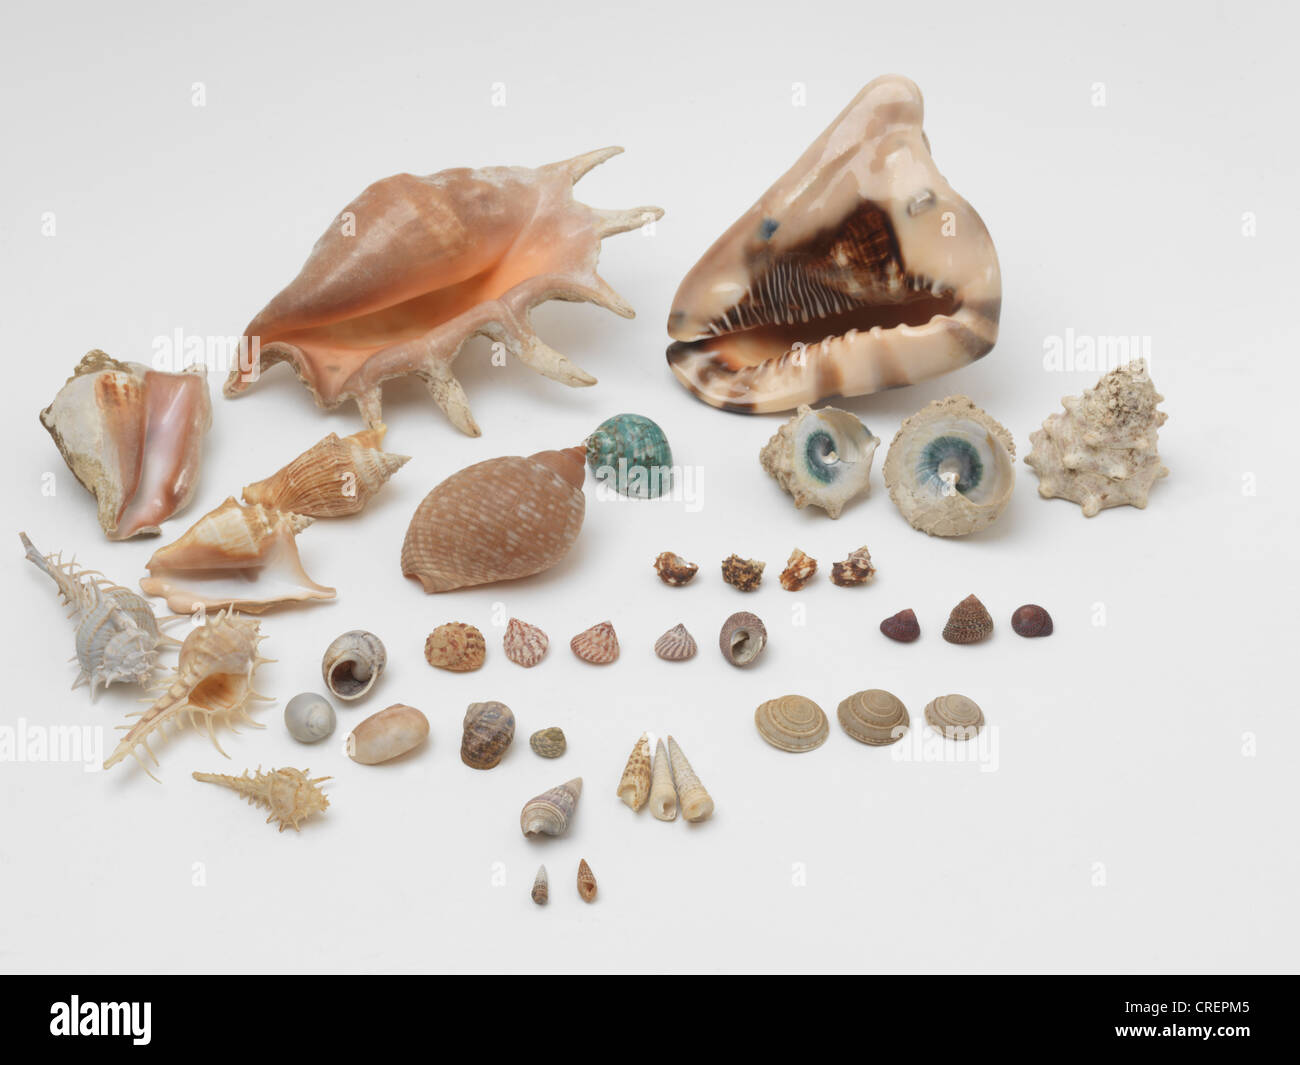 Shells One Piece Coiled Sea Snails Stock Photo